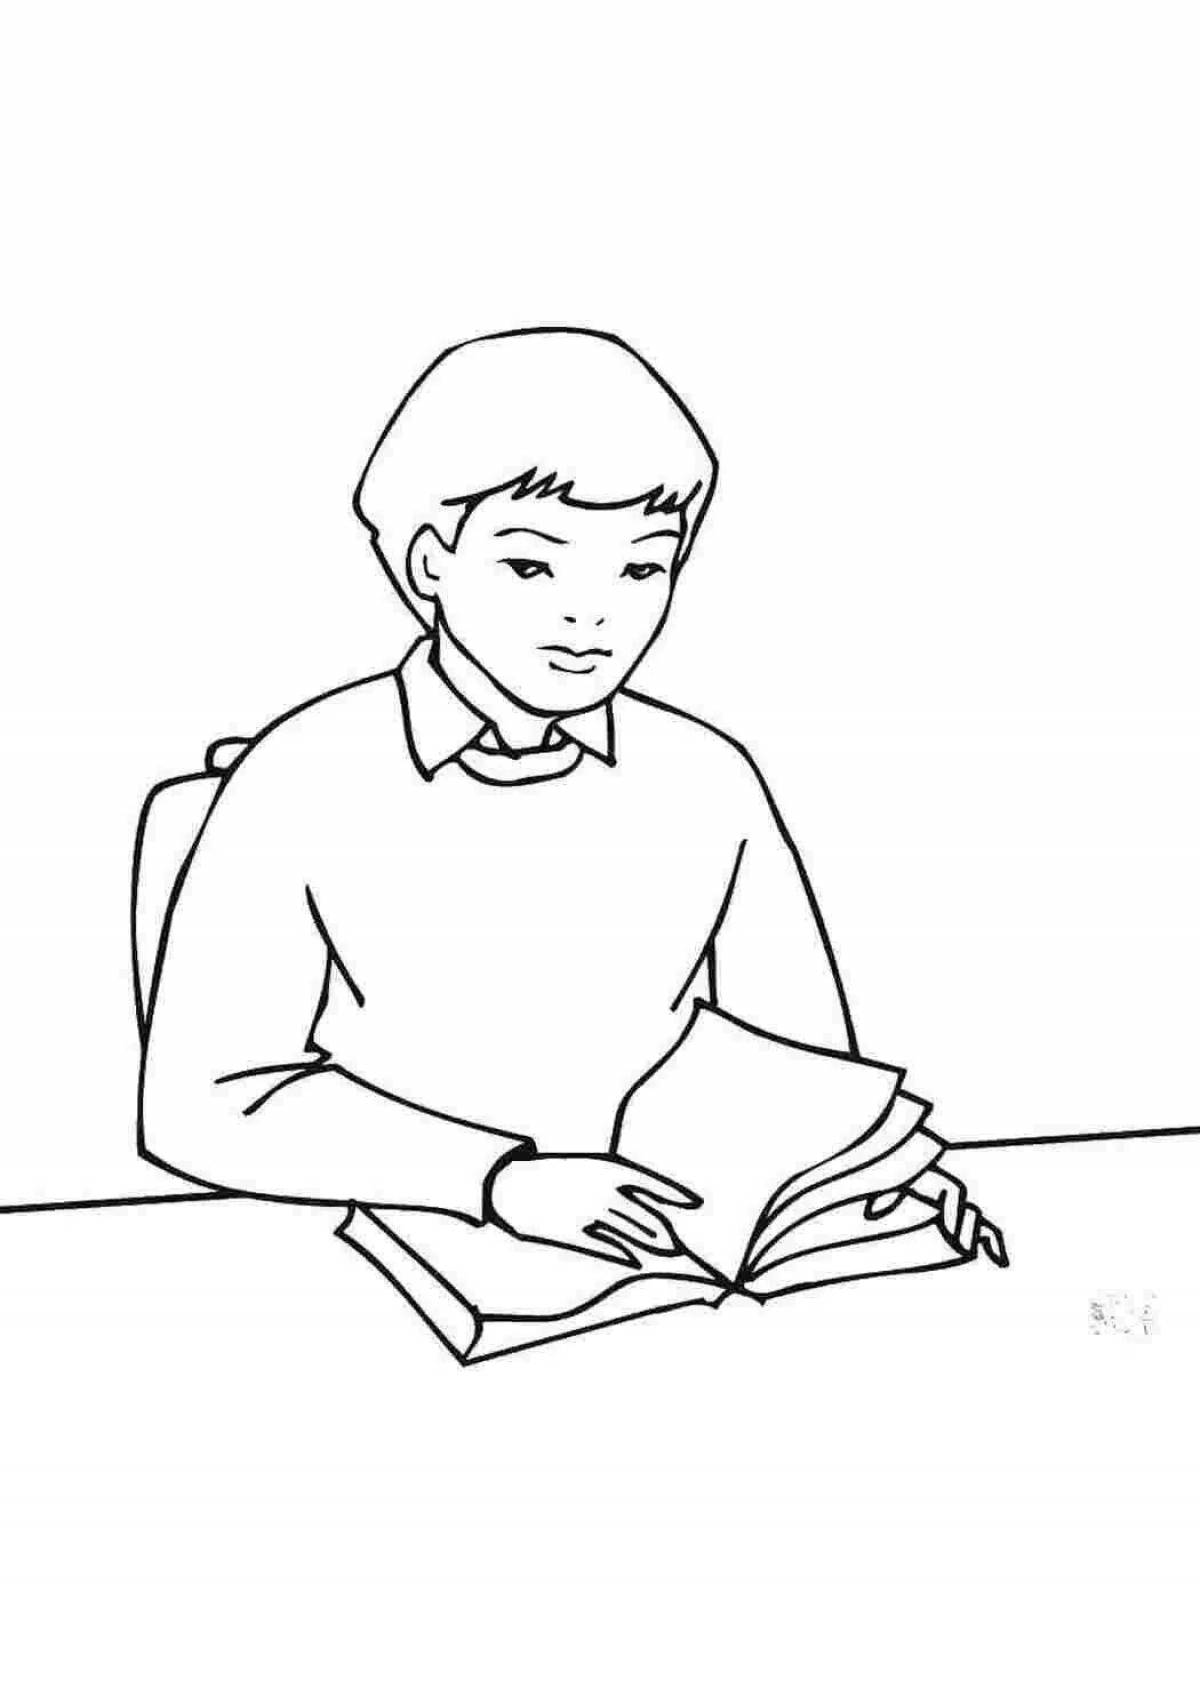 Bright how to draw a person coloring page